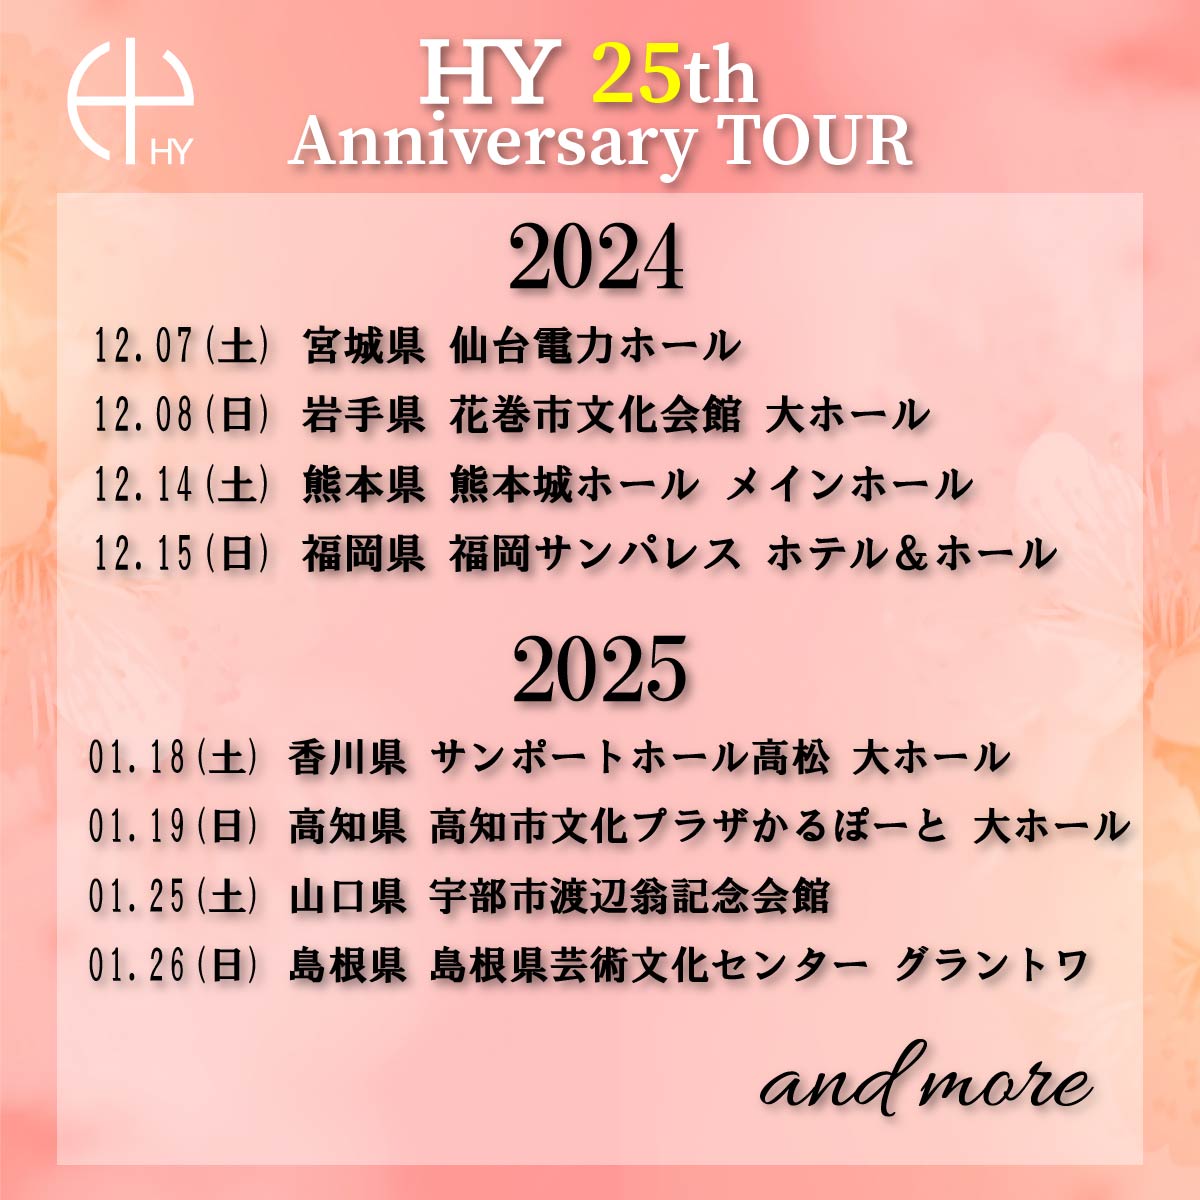 ／ HY 25th Anniversary TOUR ＼ チケットファミリーマート先行(2次)スタート！ 【受付期間】 5/7(火)18:00～5/12(日)23:59 お申し込みはこちらから▼ hy-road.net/pages/25thanni… #HY #HY25thanniversary